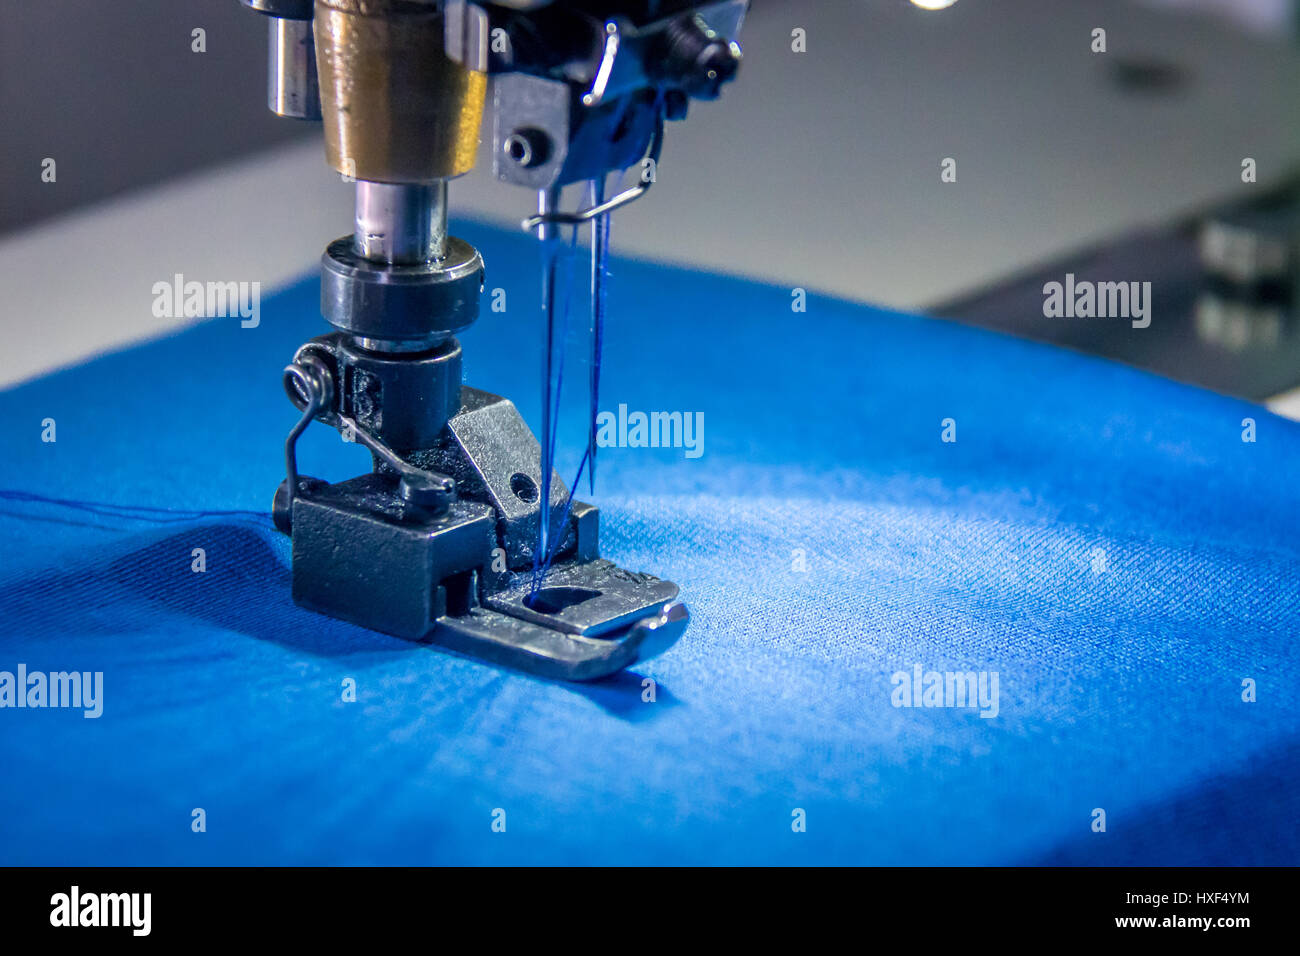 Professional overlock sewing machine with blue fabric Stock Photo